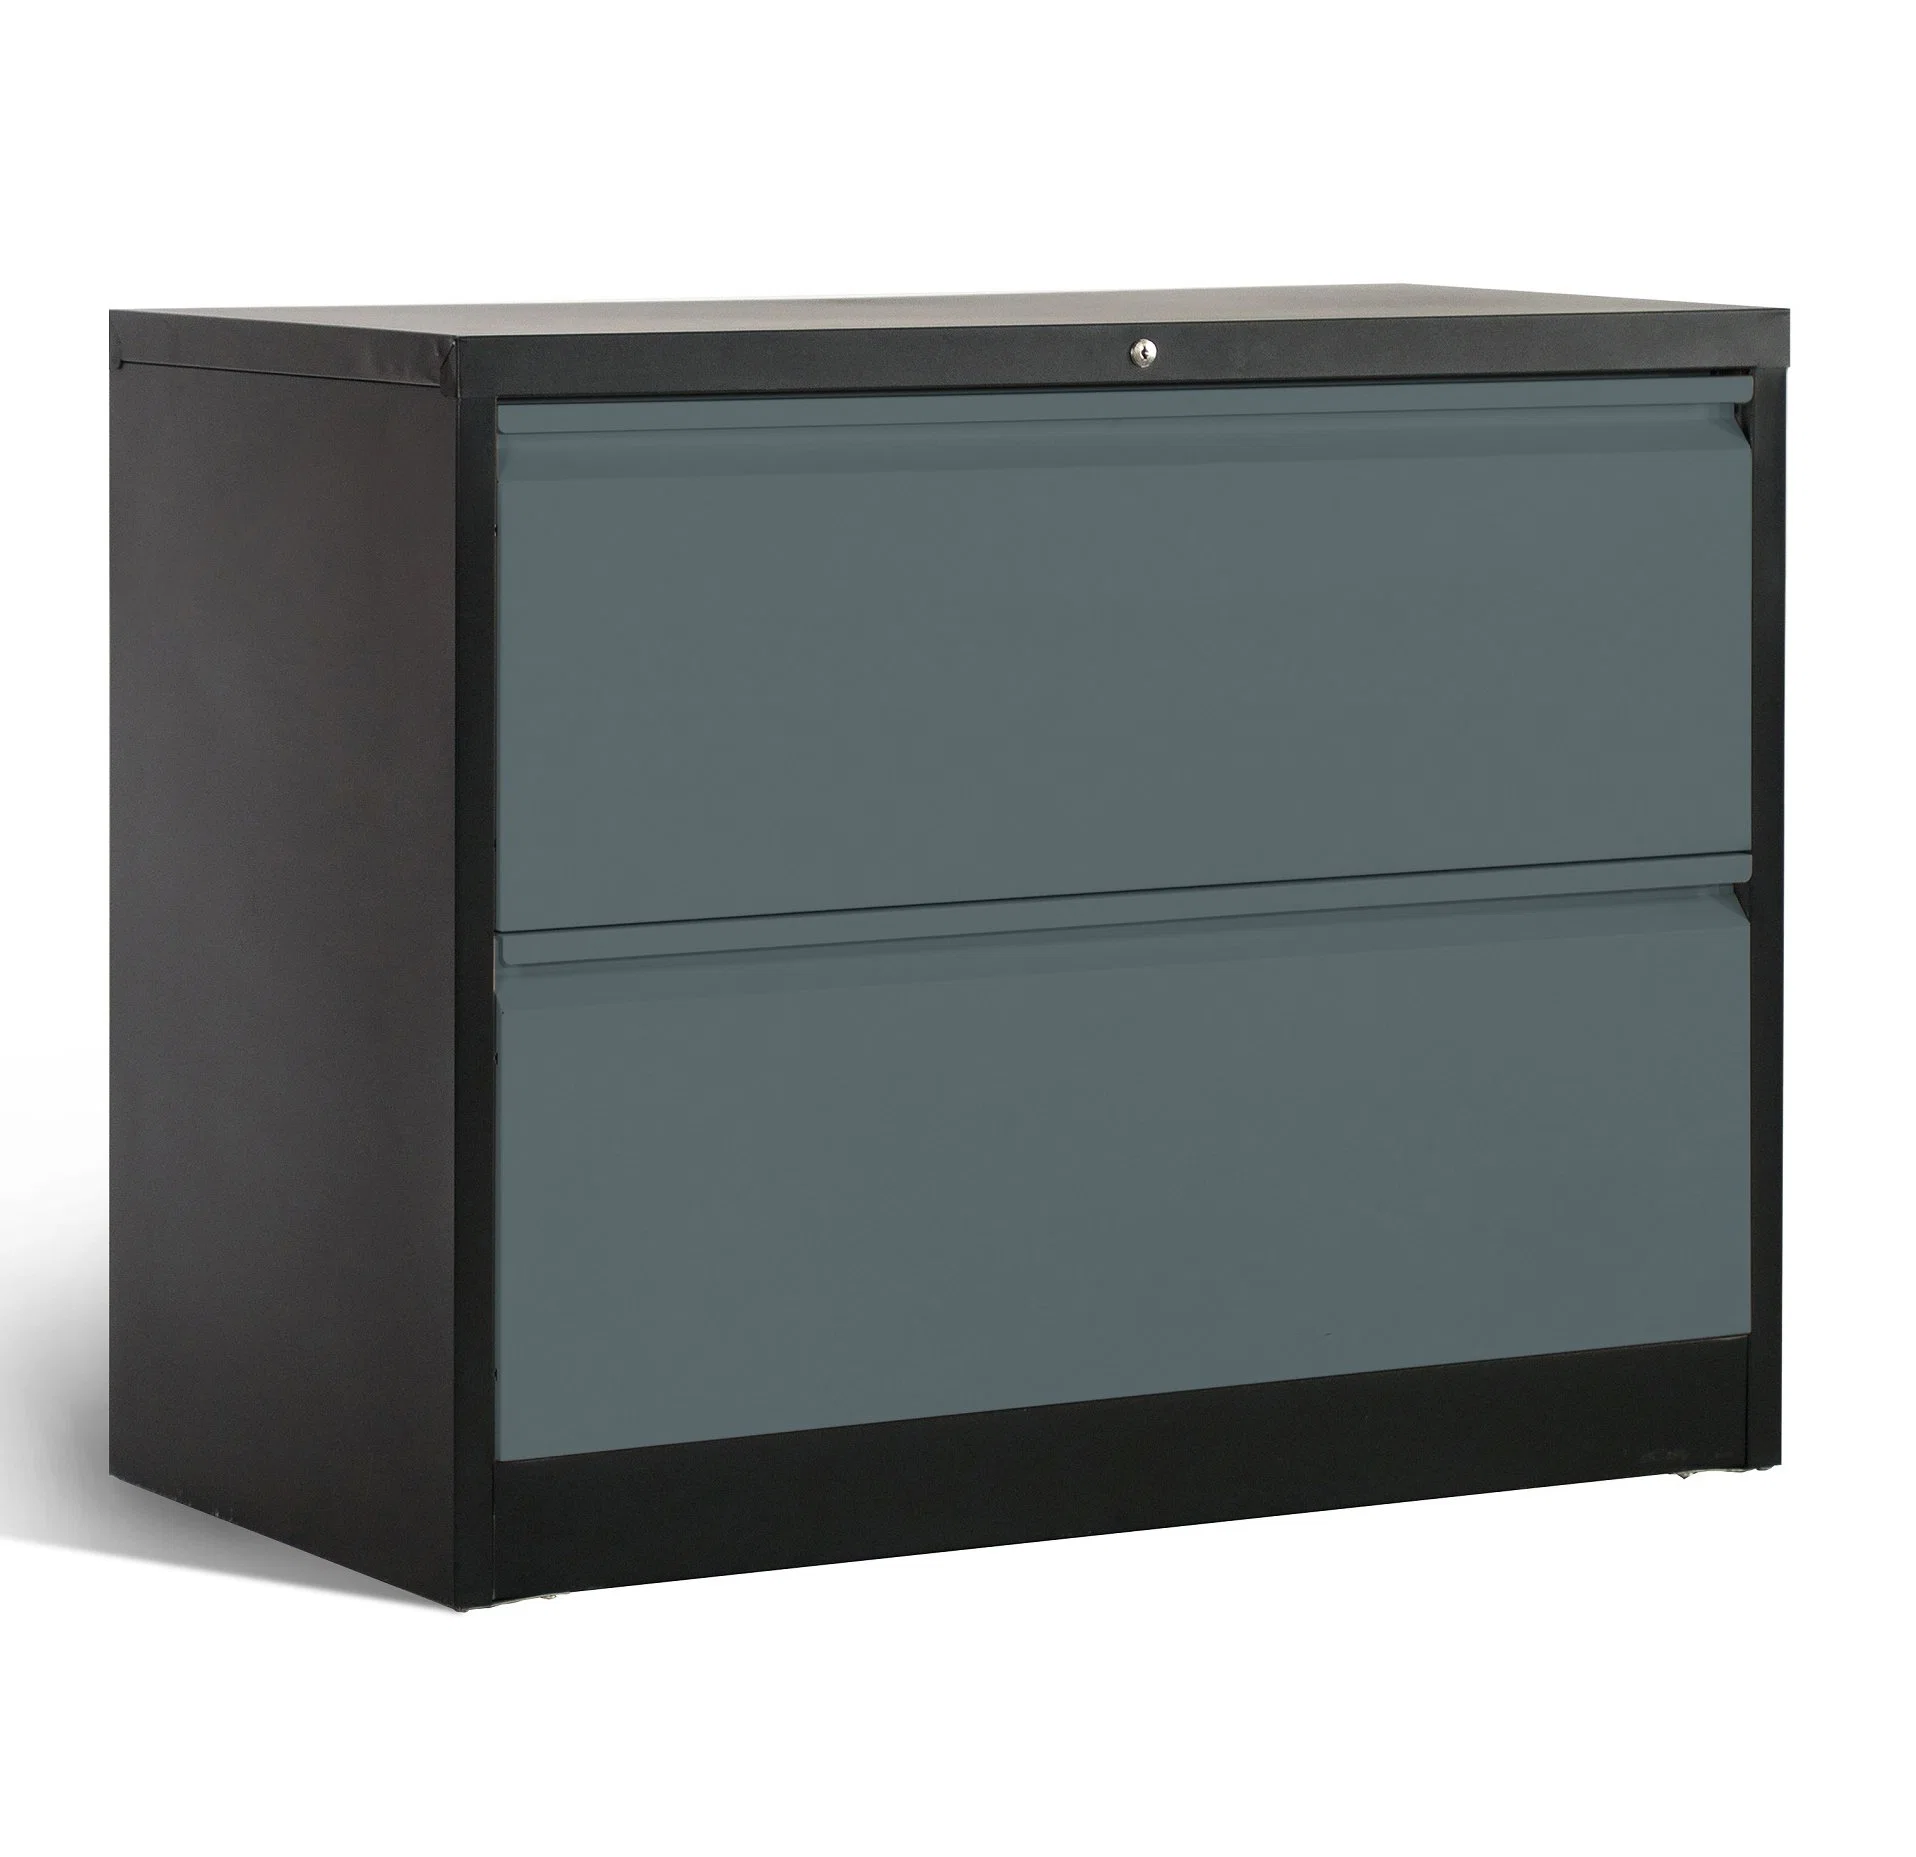 Best Quality Metal Furniture 2 Drawer Lateral Filing Cabinet for Office Anti-Tilt Steel File Storage Cabinet